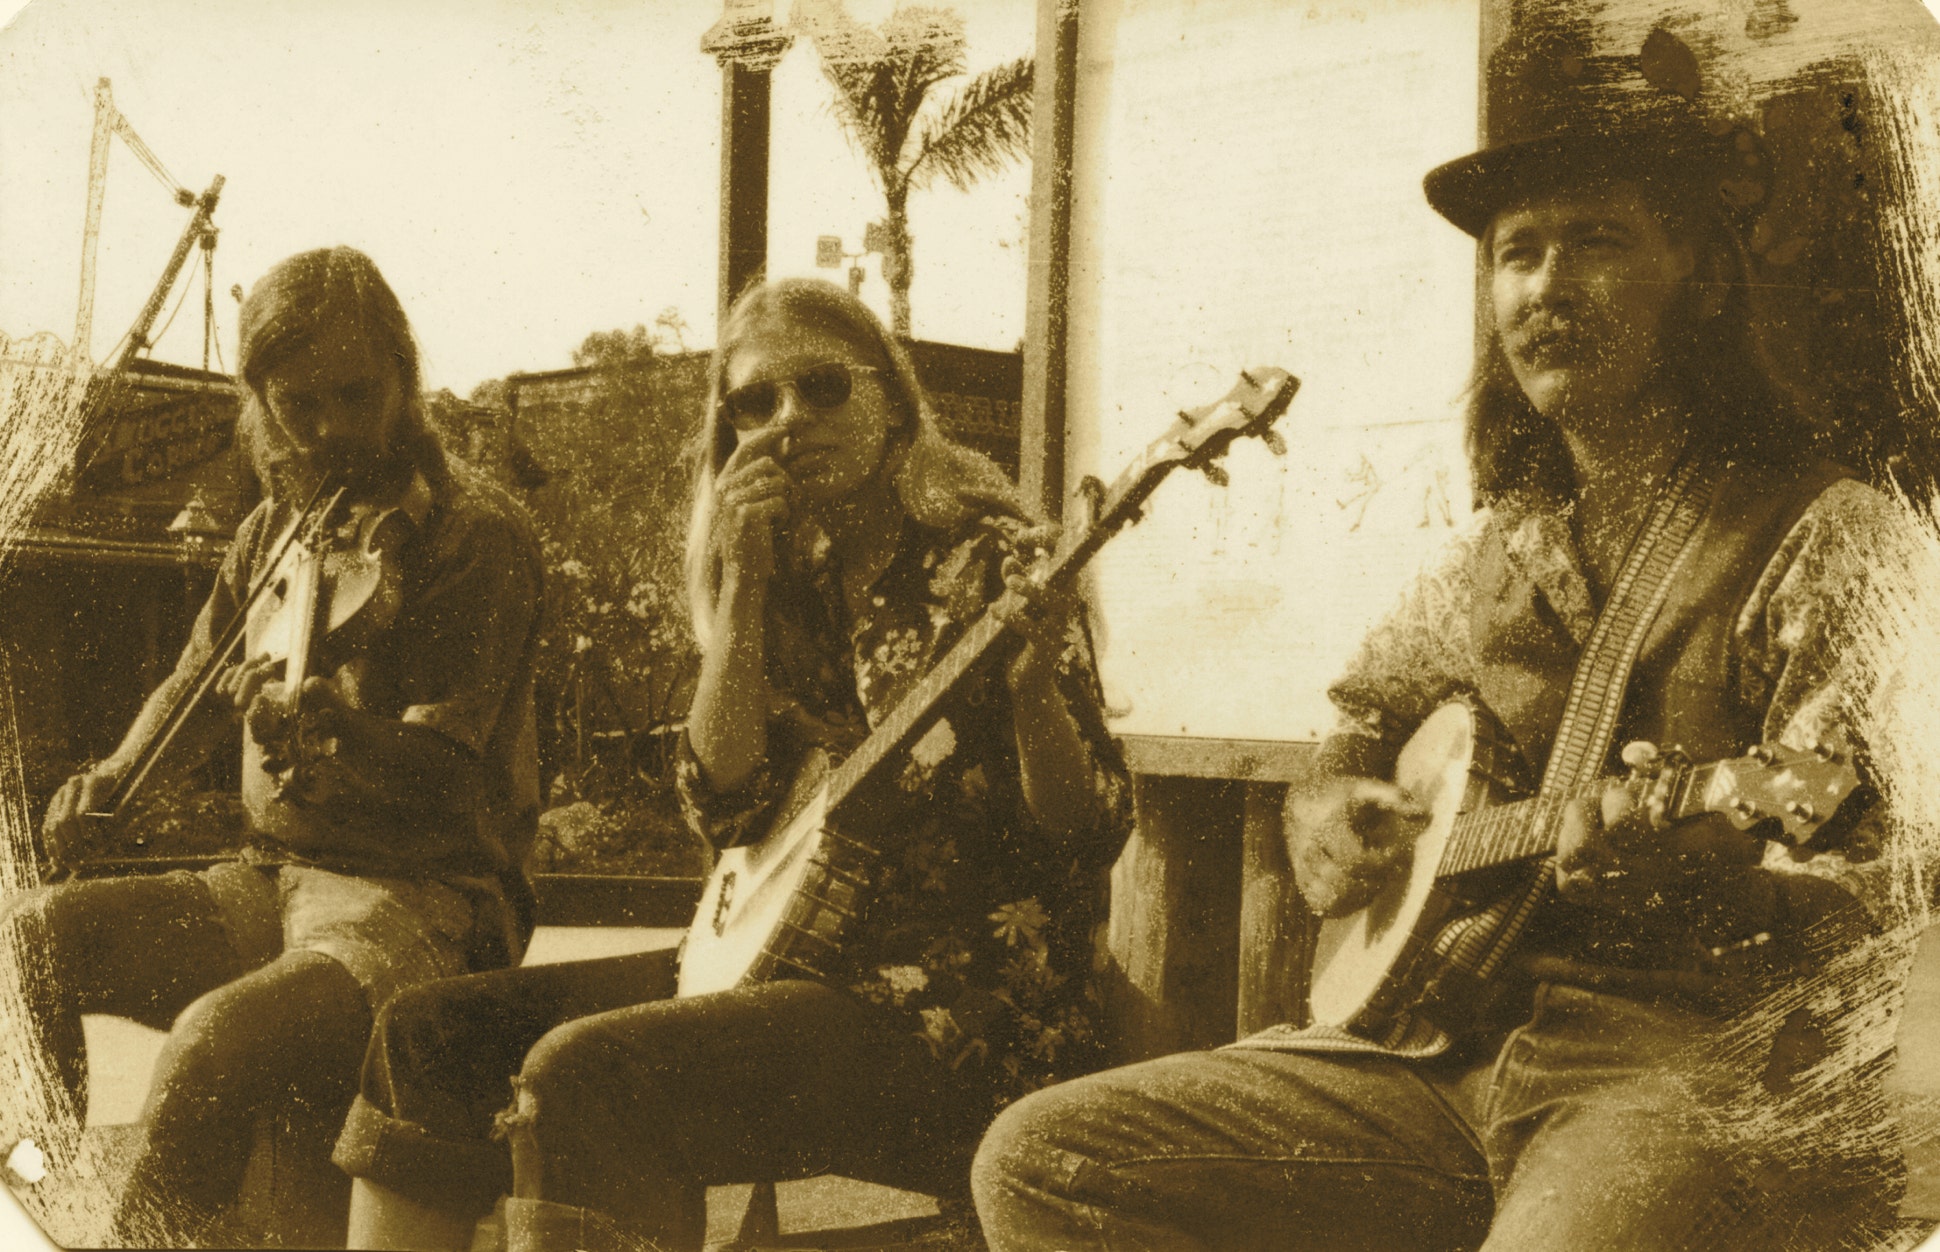 Chicken Cheek Tweakers old time string band, on stage in Old Town State Park, San Diego, California, Dave Brown on fiddle, Pam Ostergren and Ryan Thomson playing banjos, 1975.